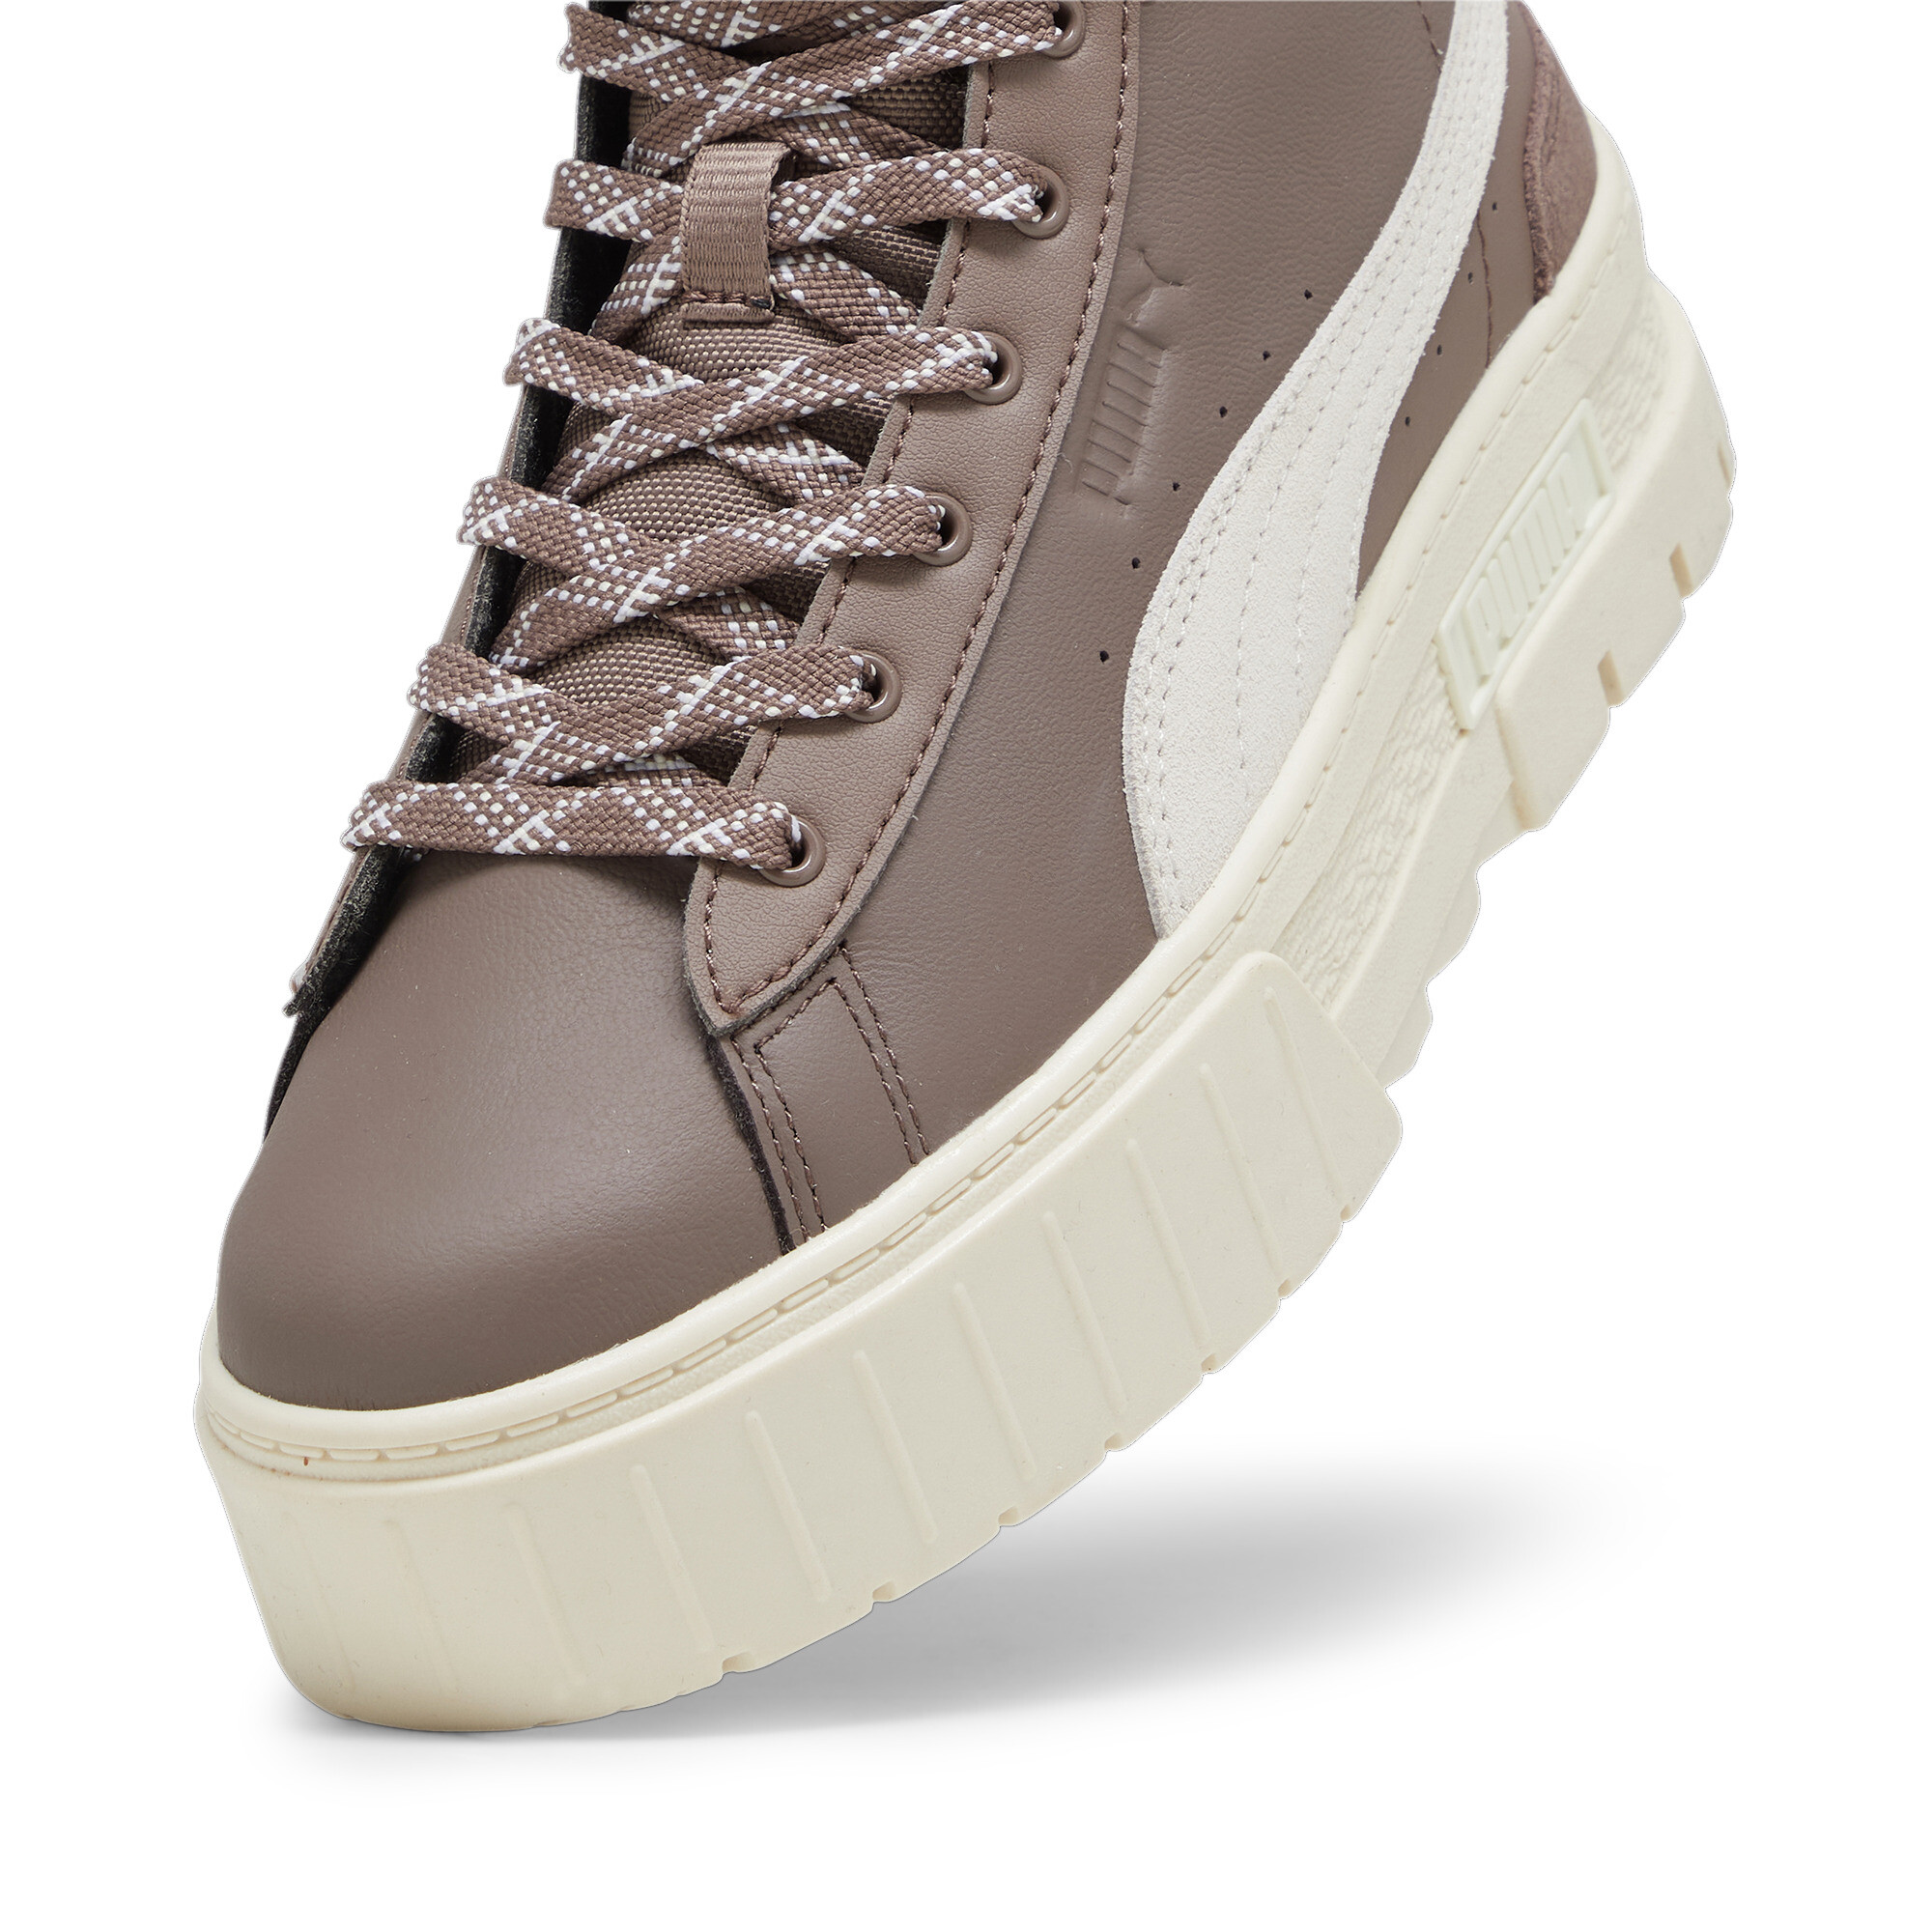 Women's Puma Mayze Mid Gentle's Sneakers, Brown, Size 38, Shoes